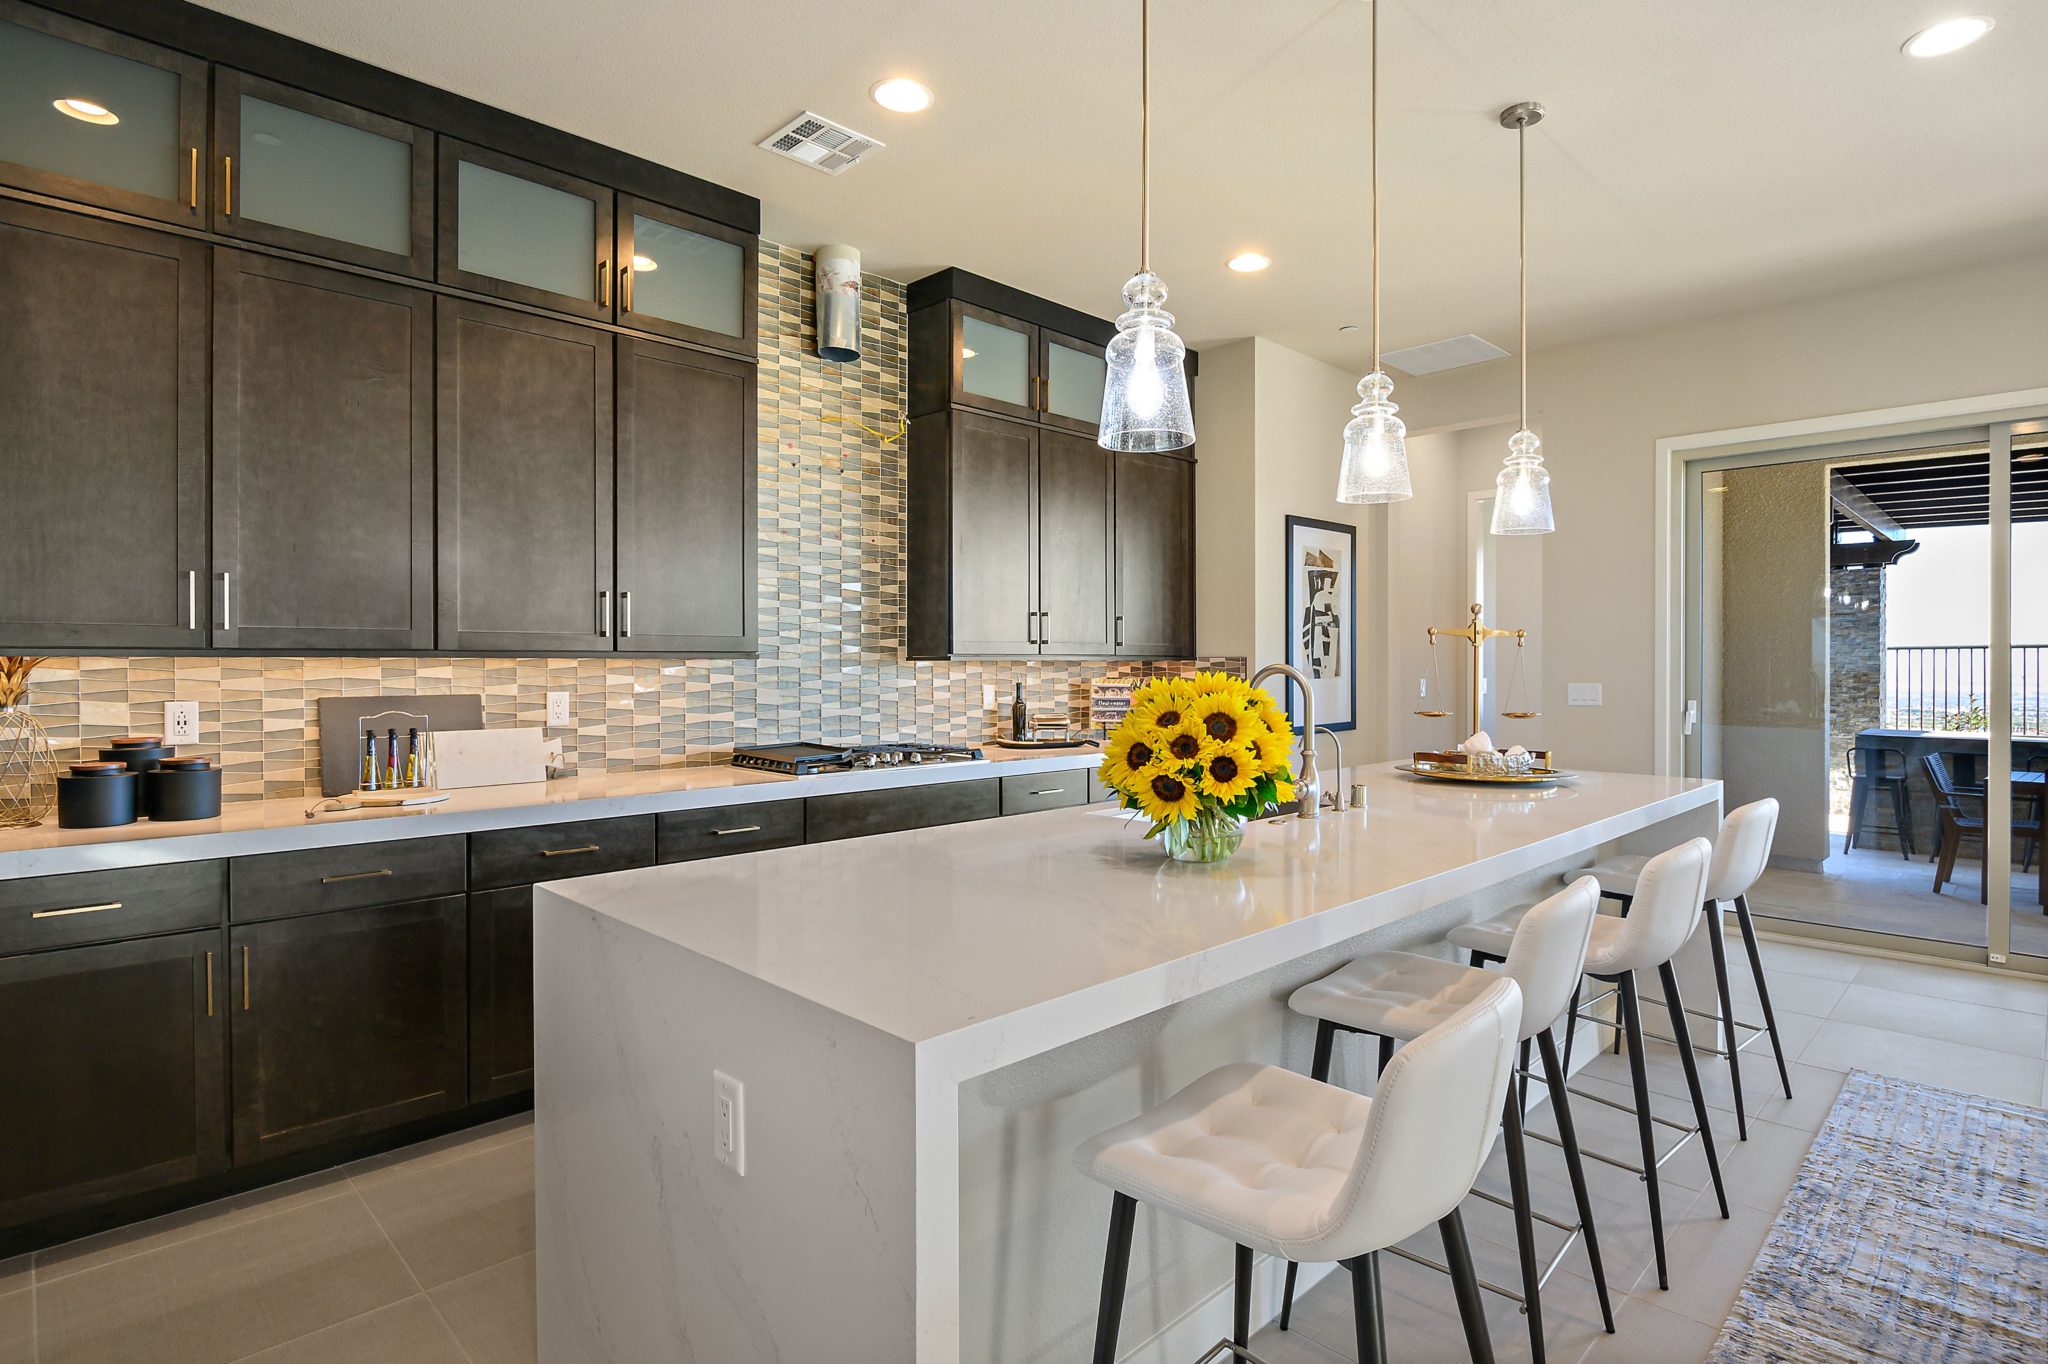 Kitchen of Sunflower Model at Savannah by Taylor Morrison